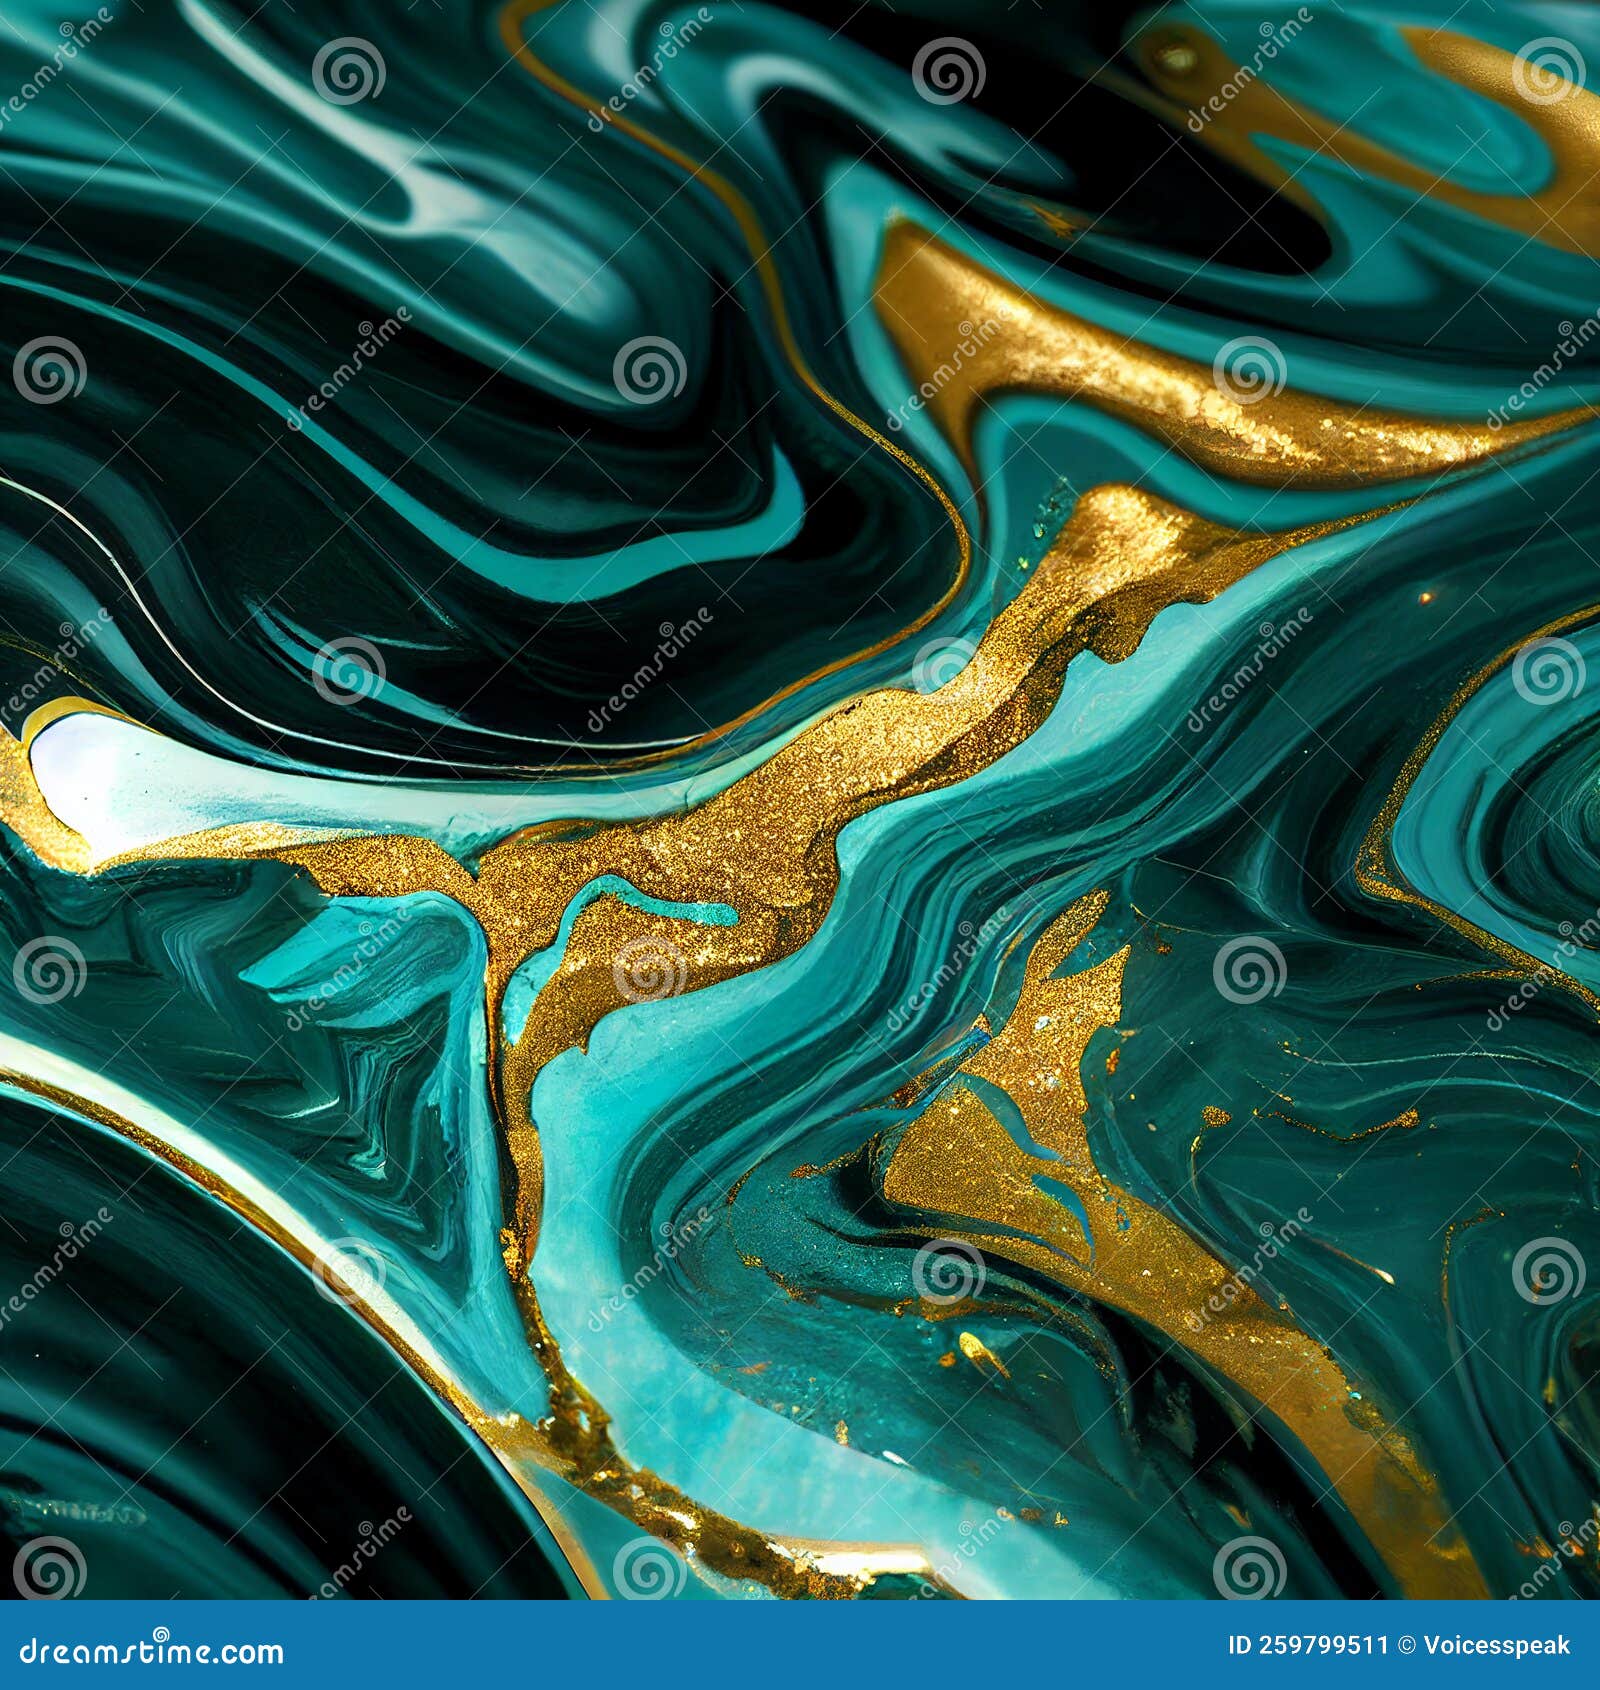 abstract turquoise bluish green marble paint background with gold veins